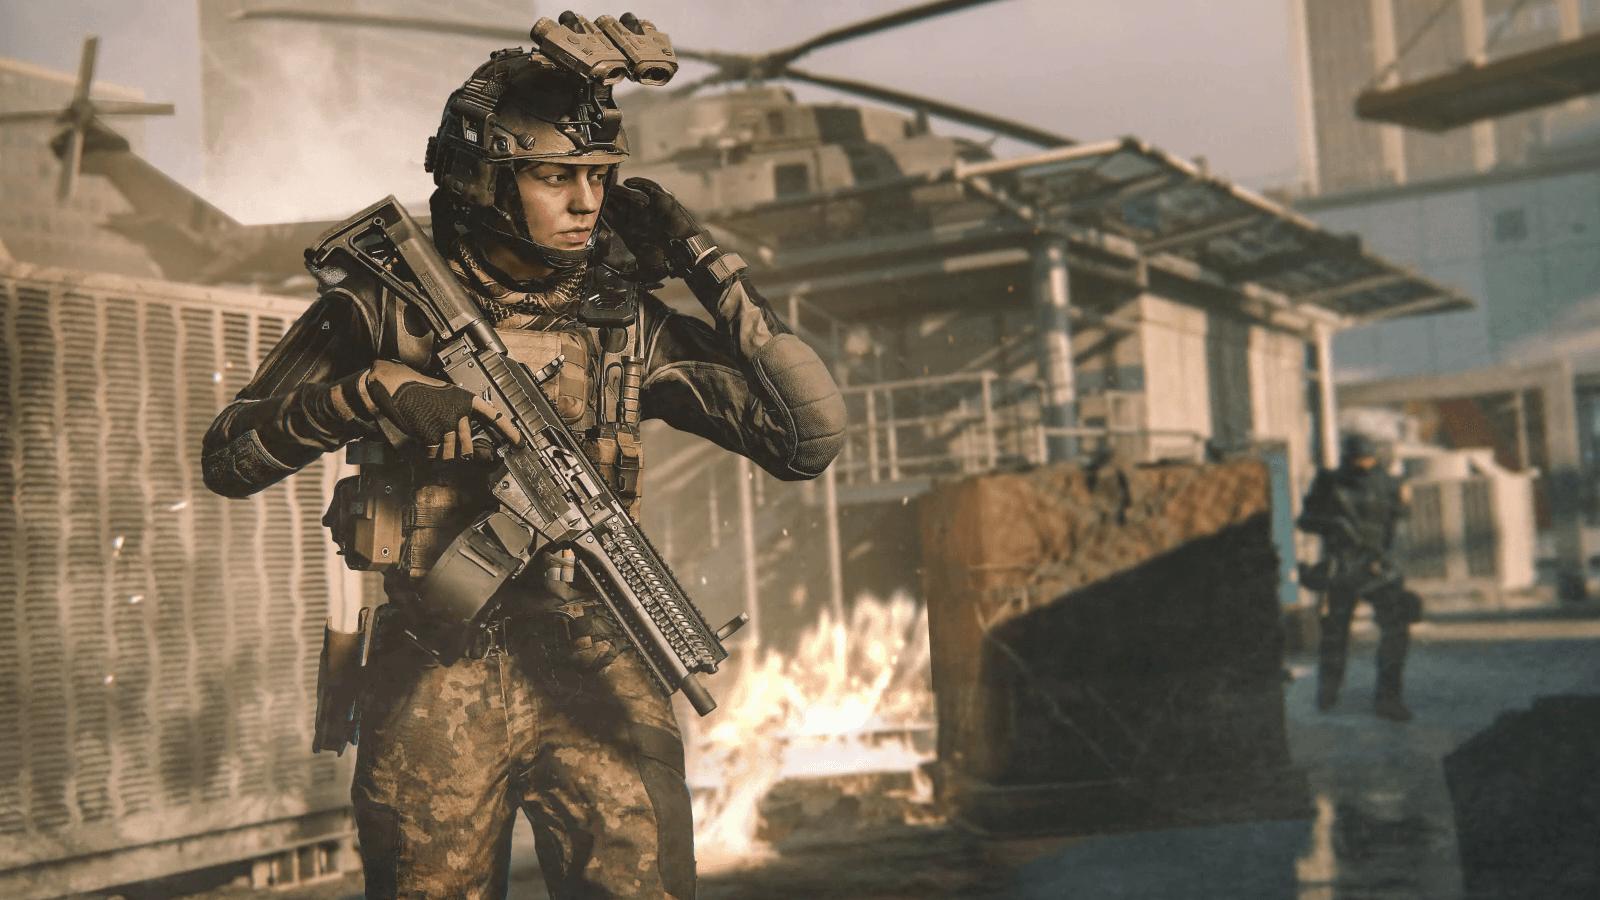 Modern Warfare 3 Release Date and Campaign Details - Call of Duty: MW3  Guide - IGN